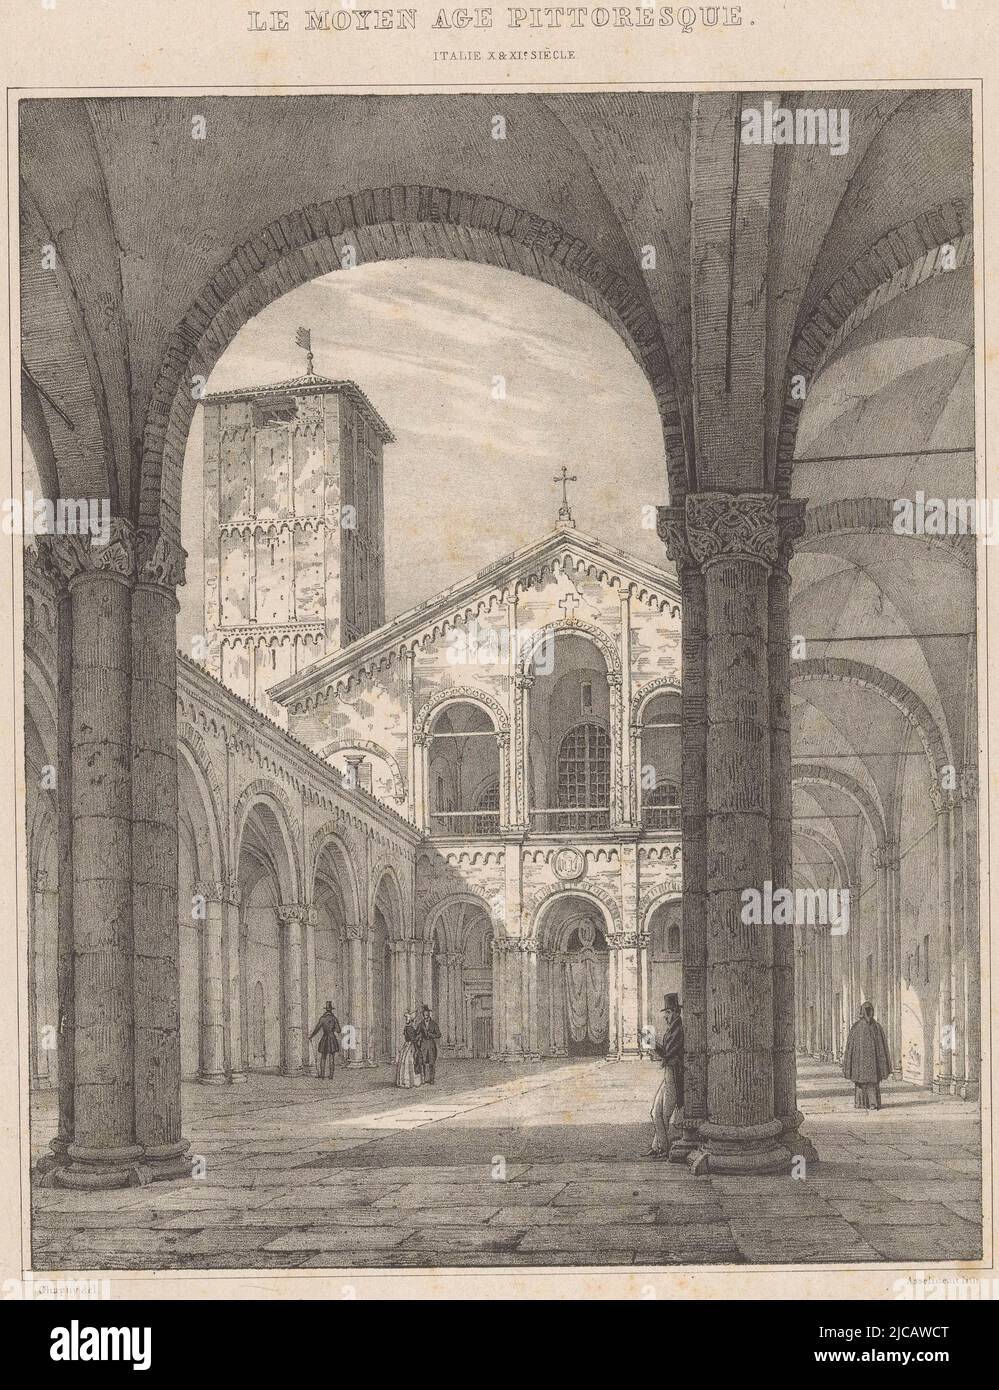 View of the Basilica of St Ambrose in Milan St Ambroise a Milan  Le Moyen Age pittoresque  on object, print maker: Léon Auguste Asselineau, (mentioned on object), Nicolas Marie Joseph Chapuy, (mentioned on object), printer: Benard Lemercier & Cie, (mentioned on object), print maker: Rouen, Paris, printer: Paris, publisher: Paris, 1837 - 1839, paper, h 445 mm × w 300 mm Stock Photo